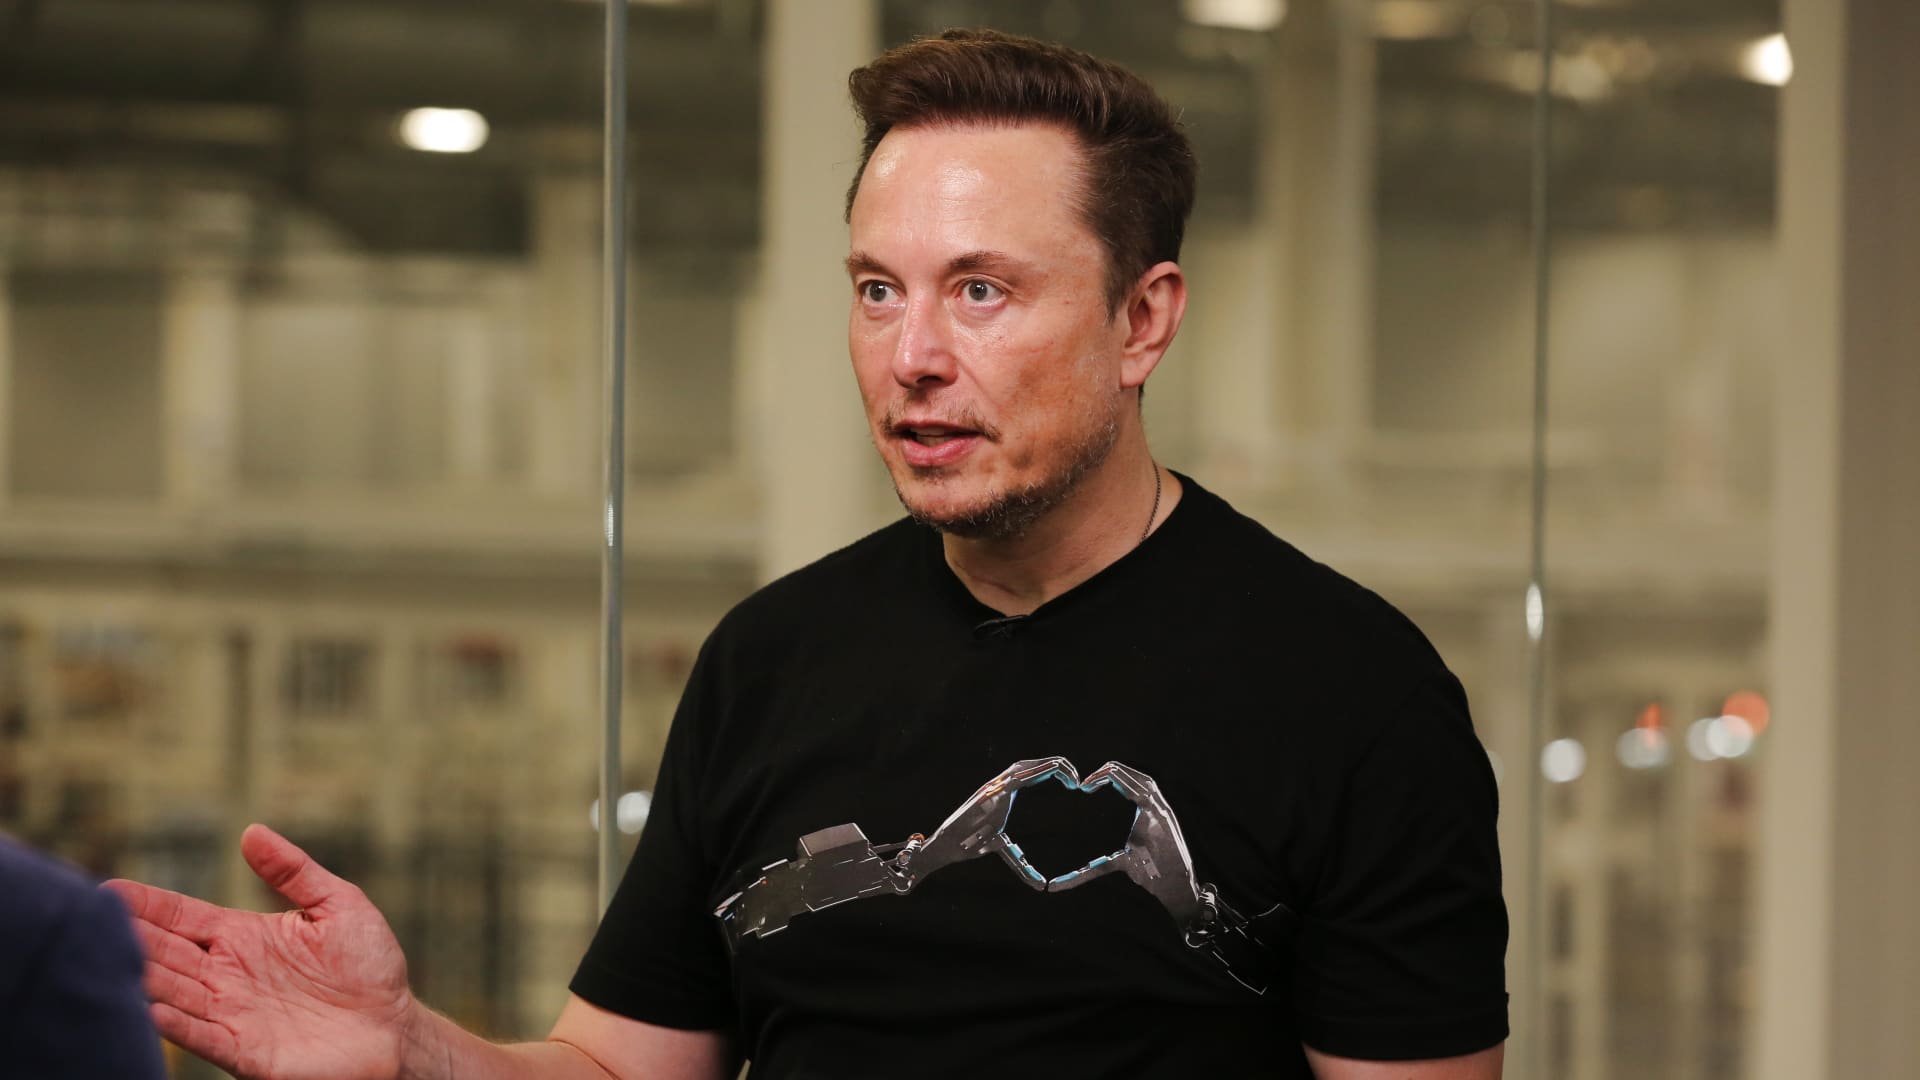 elon-musk-s-quest-for-an-irresistible-price-could-spell-trouble-for-tesla-and-its-stock